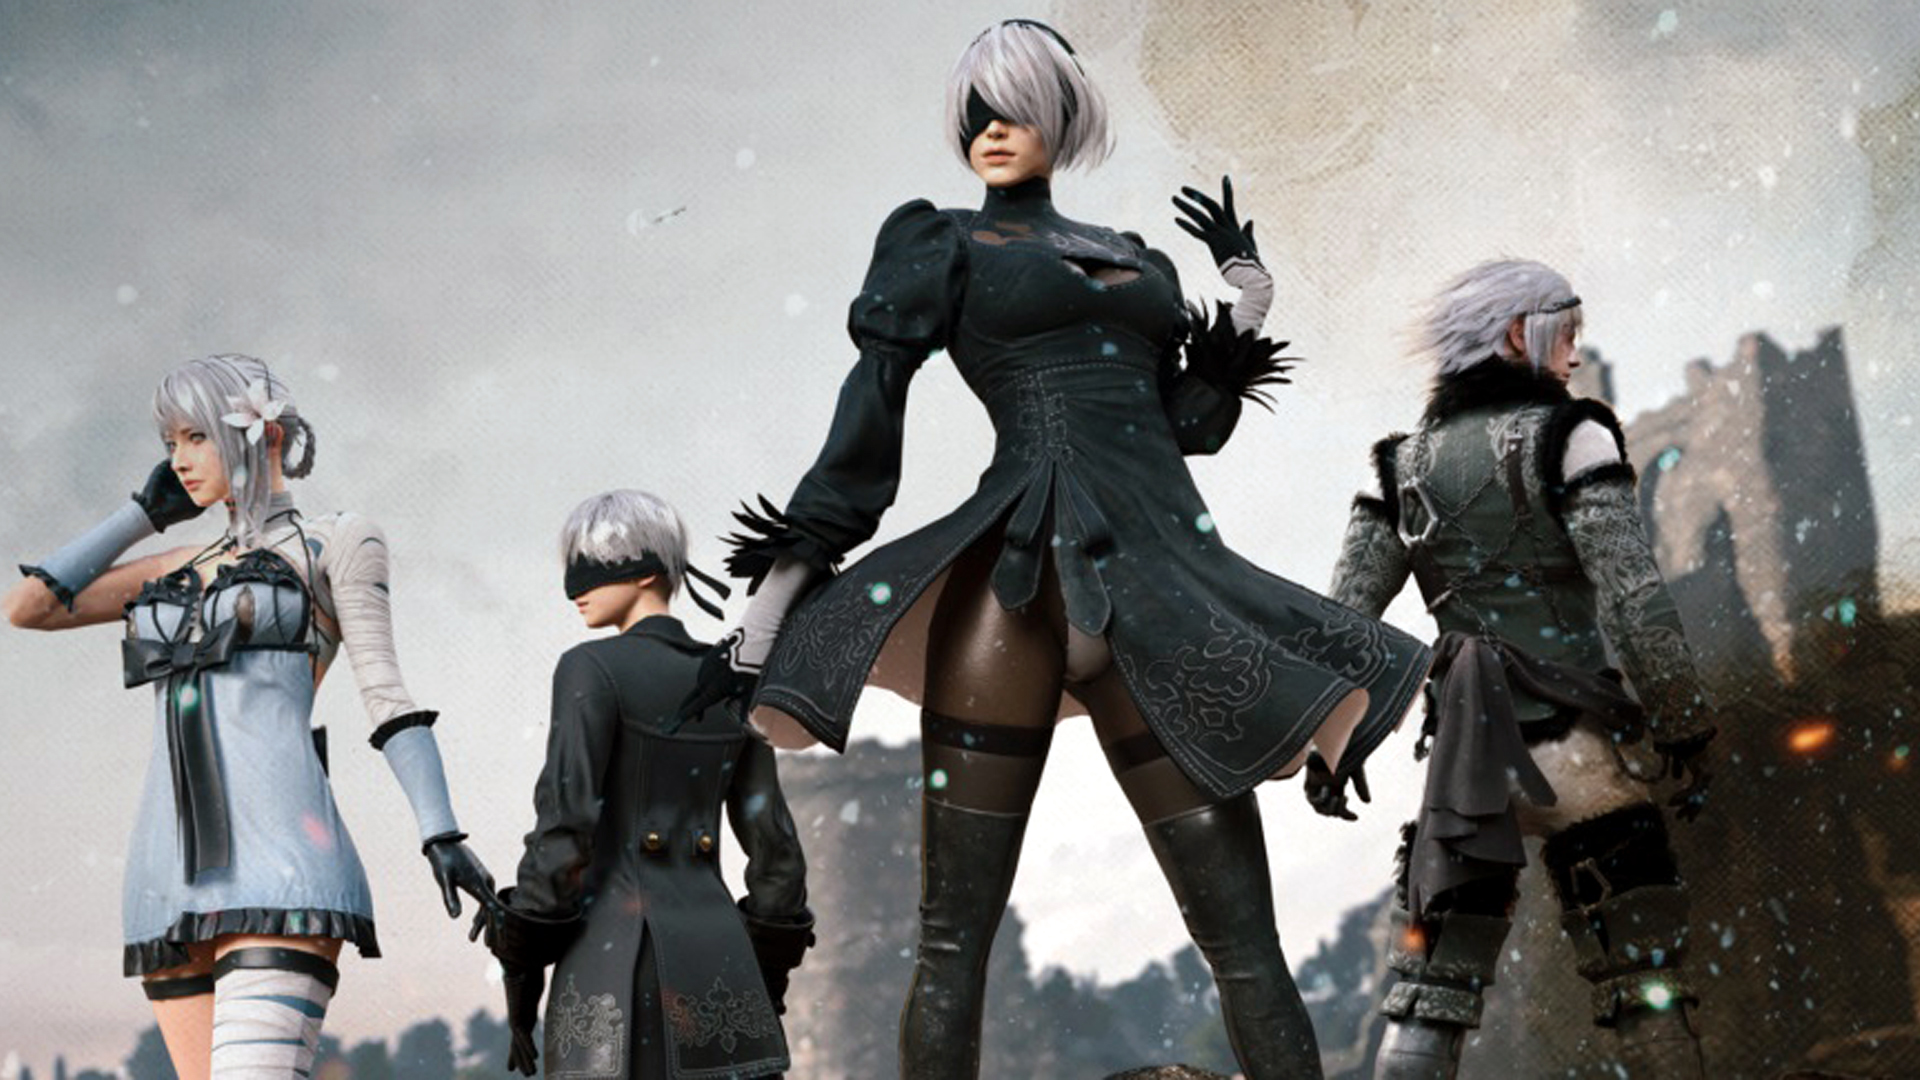 The PUBG x Nier crossover is happening